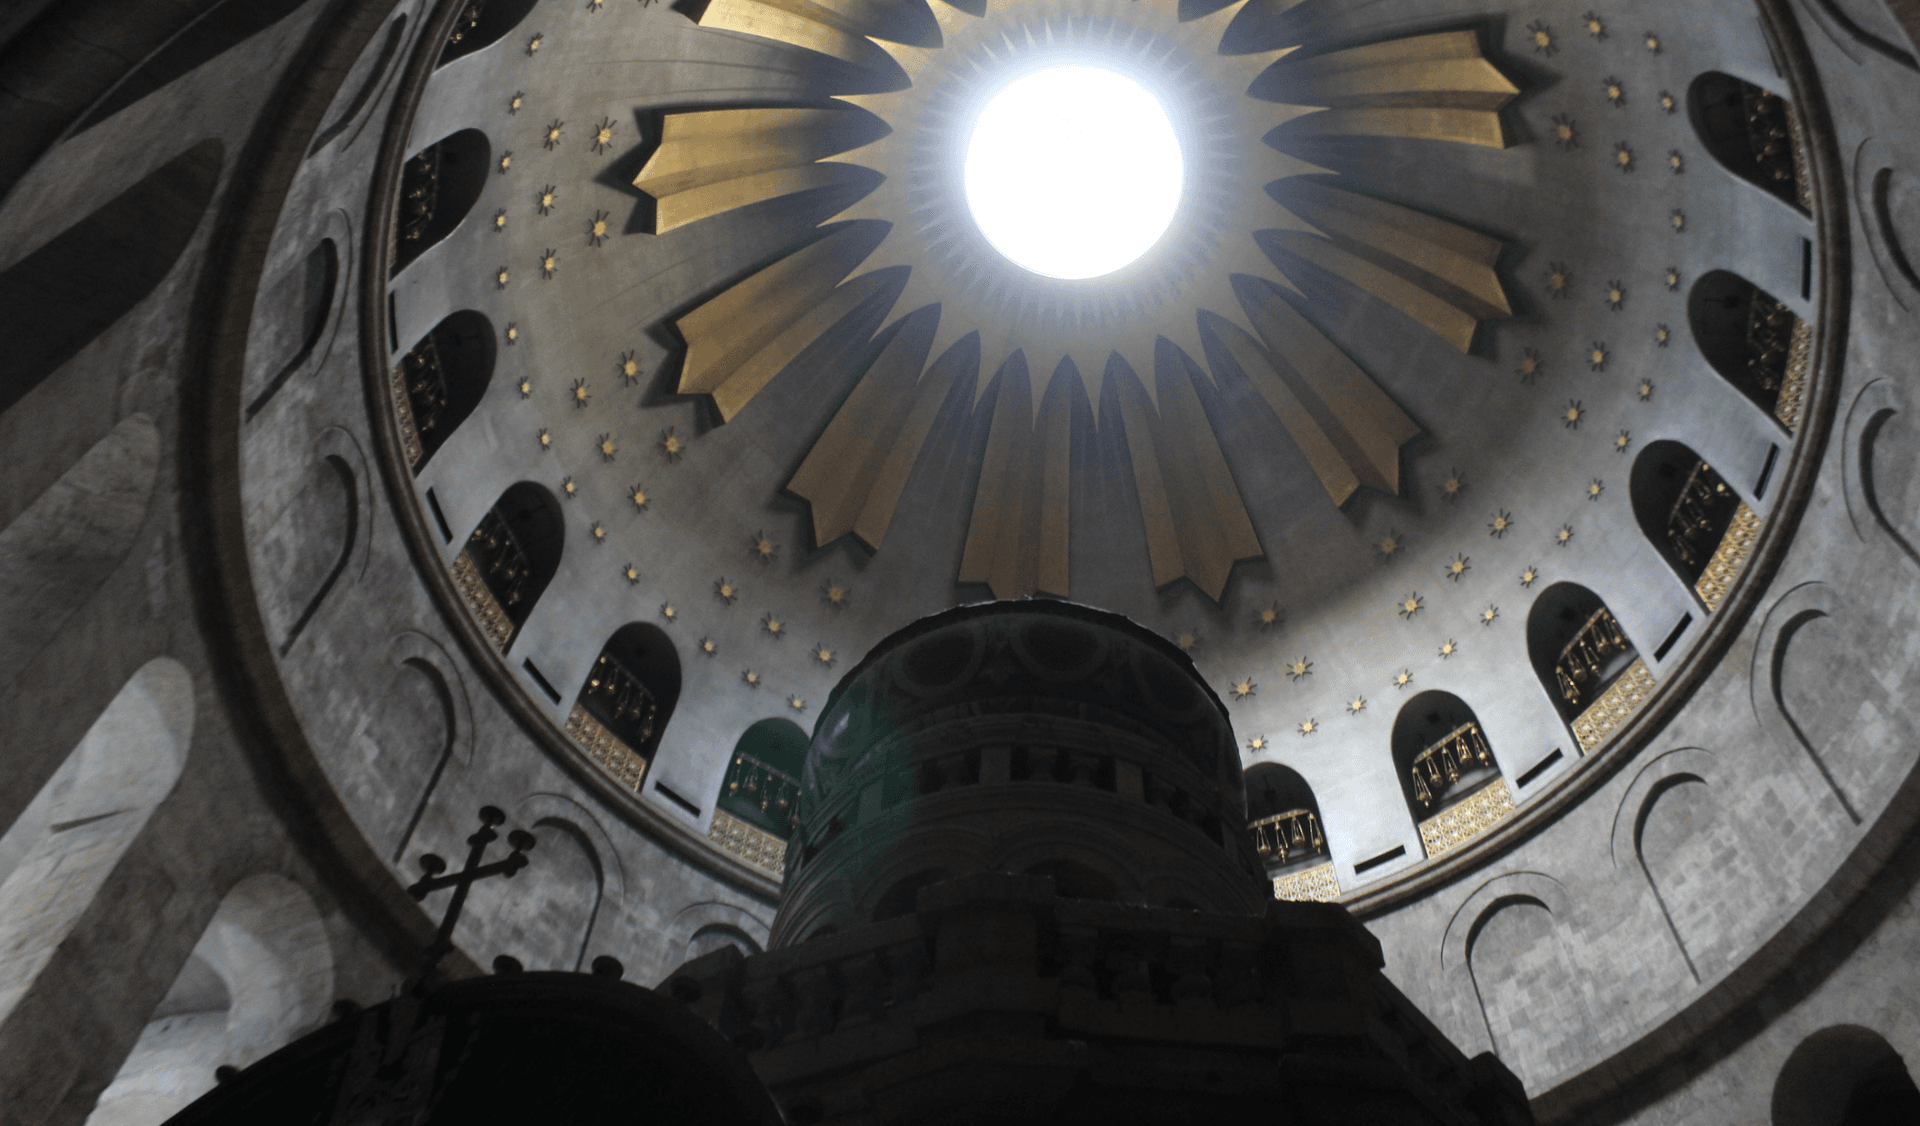 Bashar Jararah and the restoration of the Holy Sepulchre